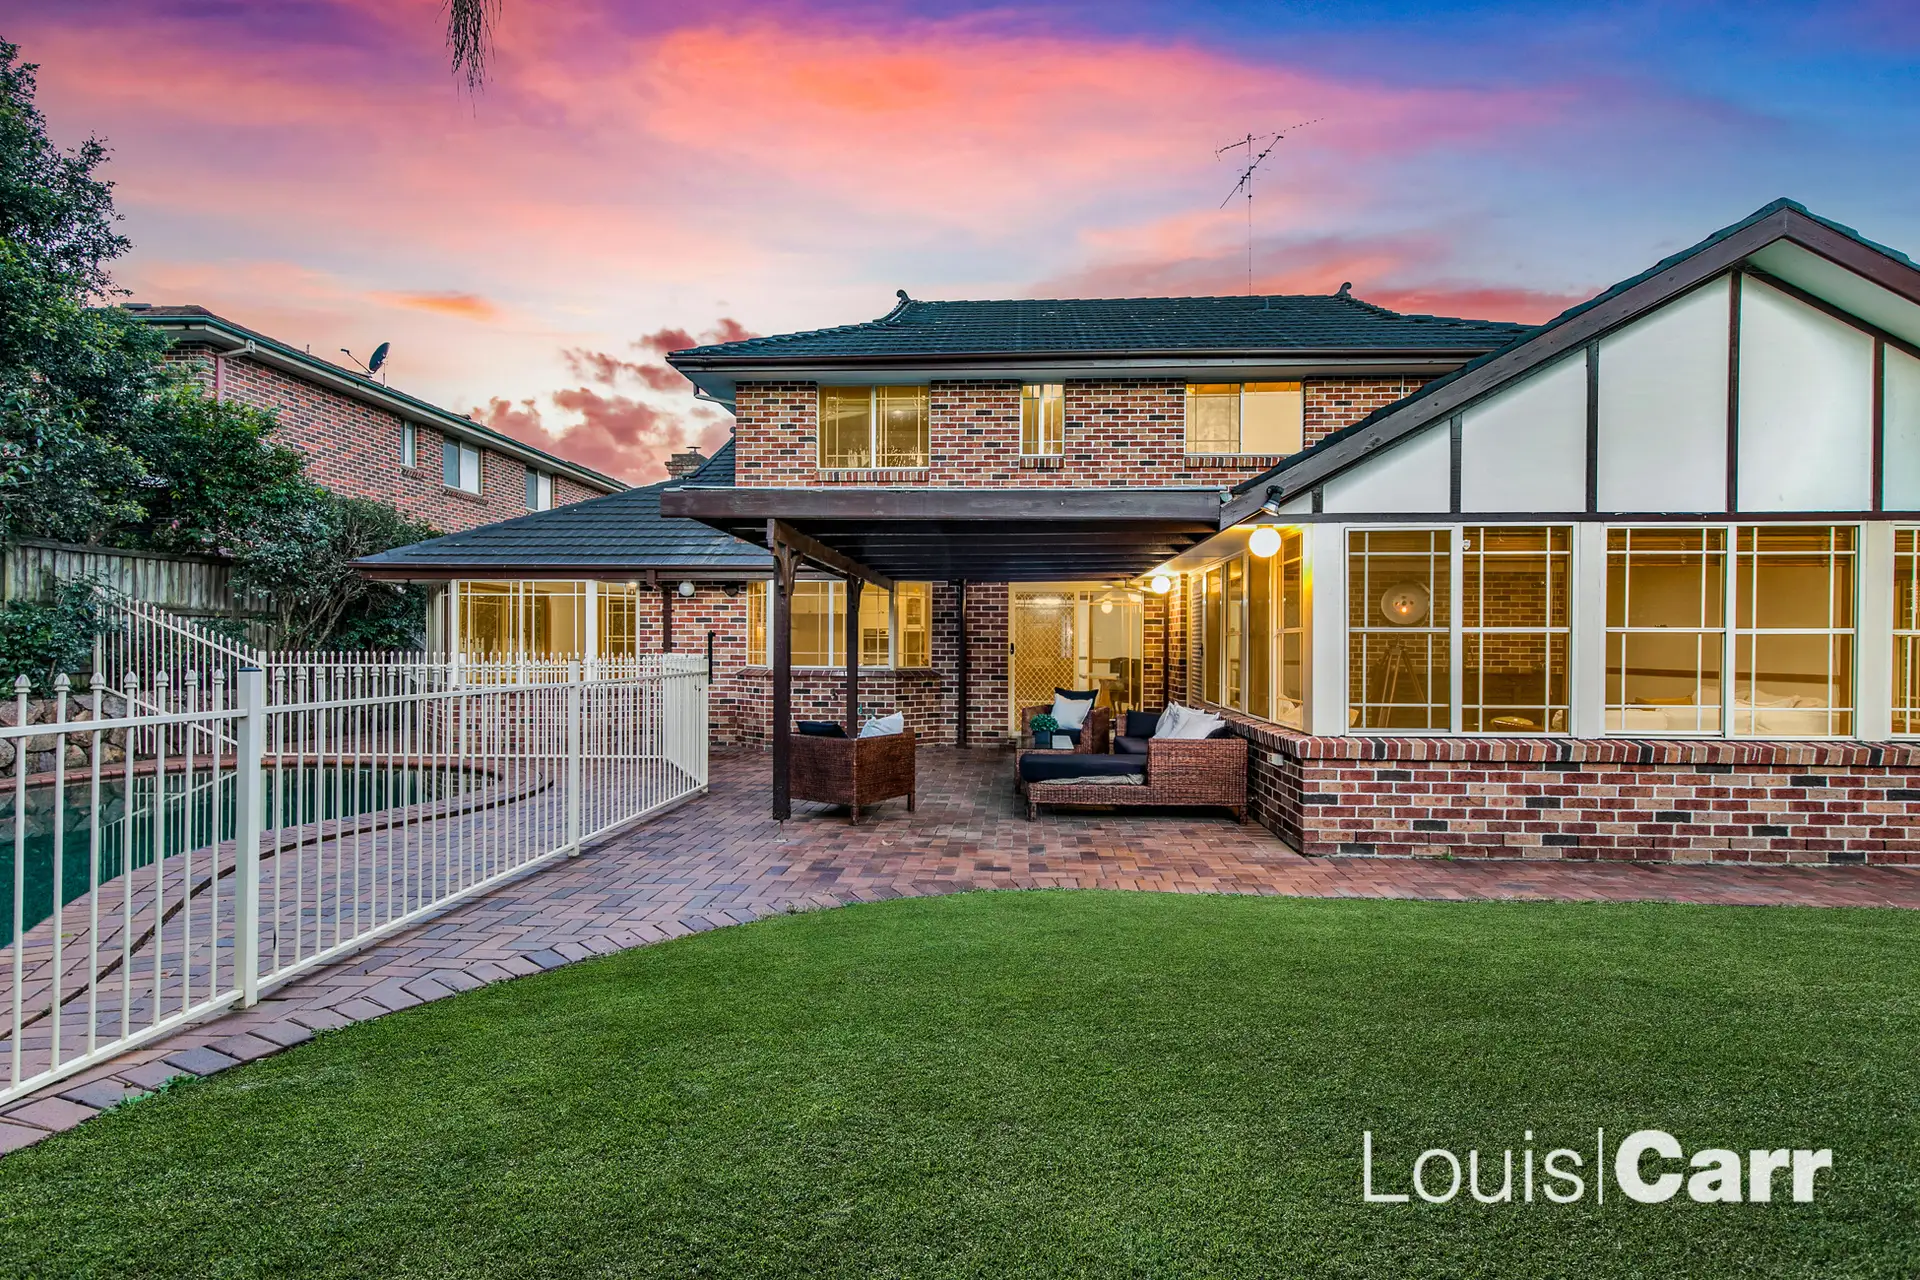 Photo #2: 3 Bowen Close, Cherrybrook - Sold by Louis Carr Real Estate